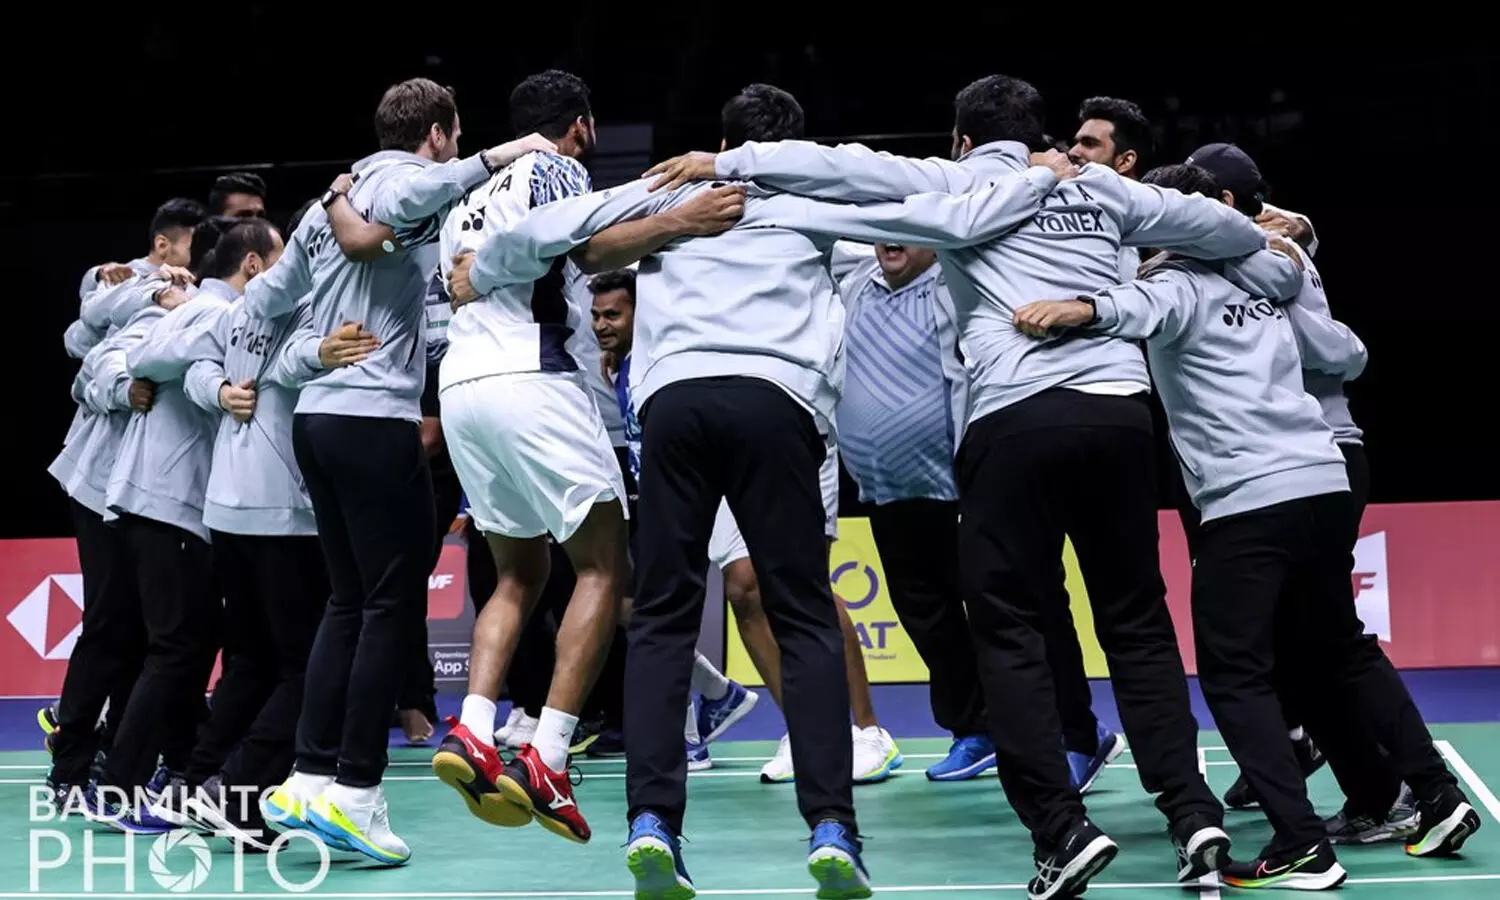 thomas cup 2022 live streaming